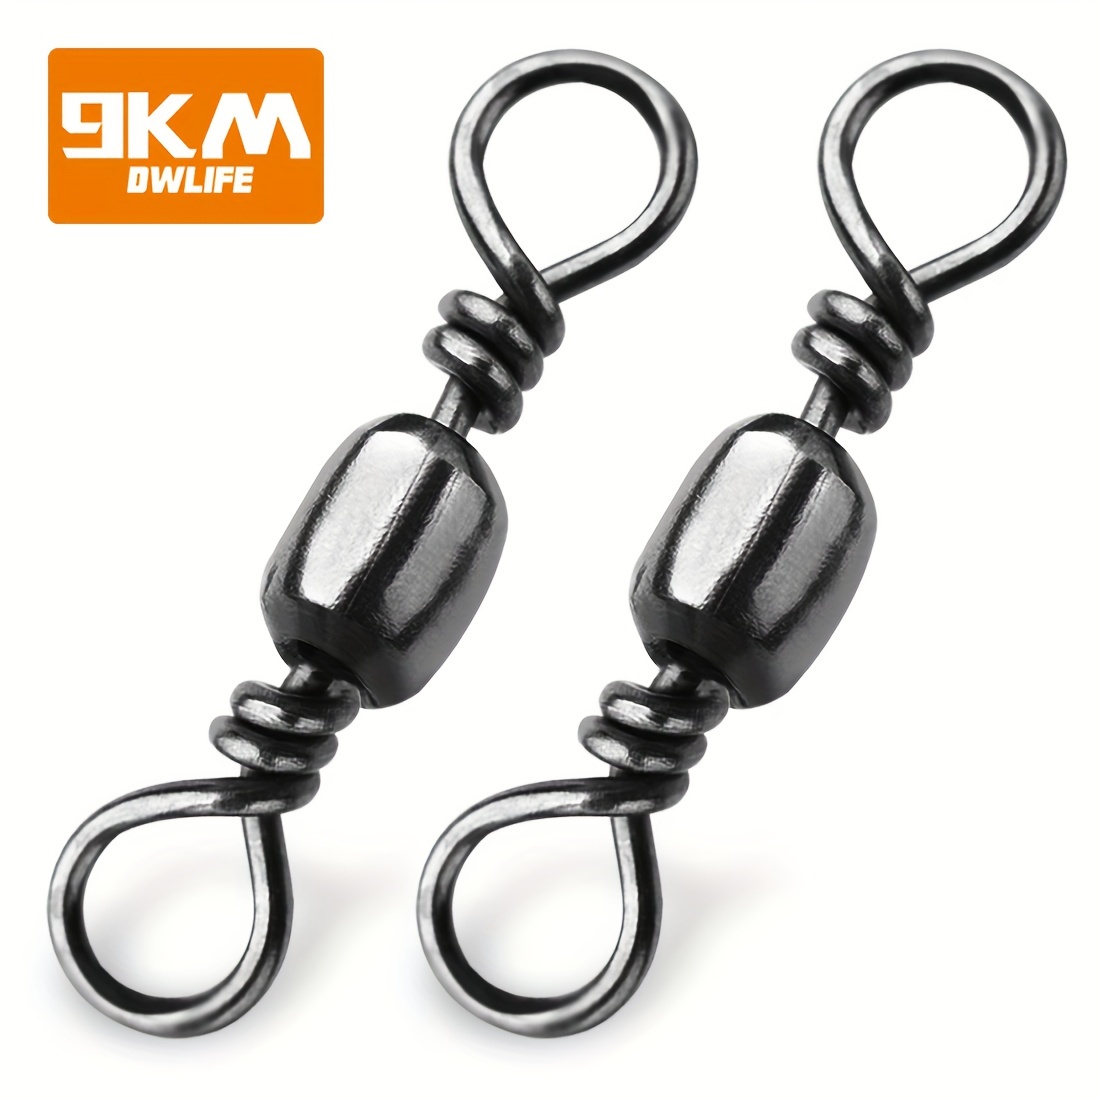 30X Fish Fishing Barrel Swivel with Interlock Snaps High Strength Safety  Tackle